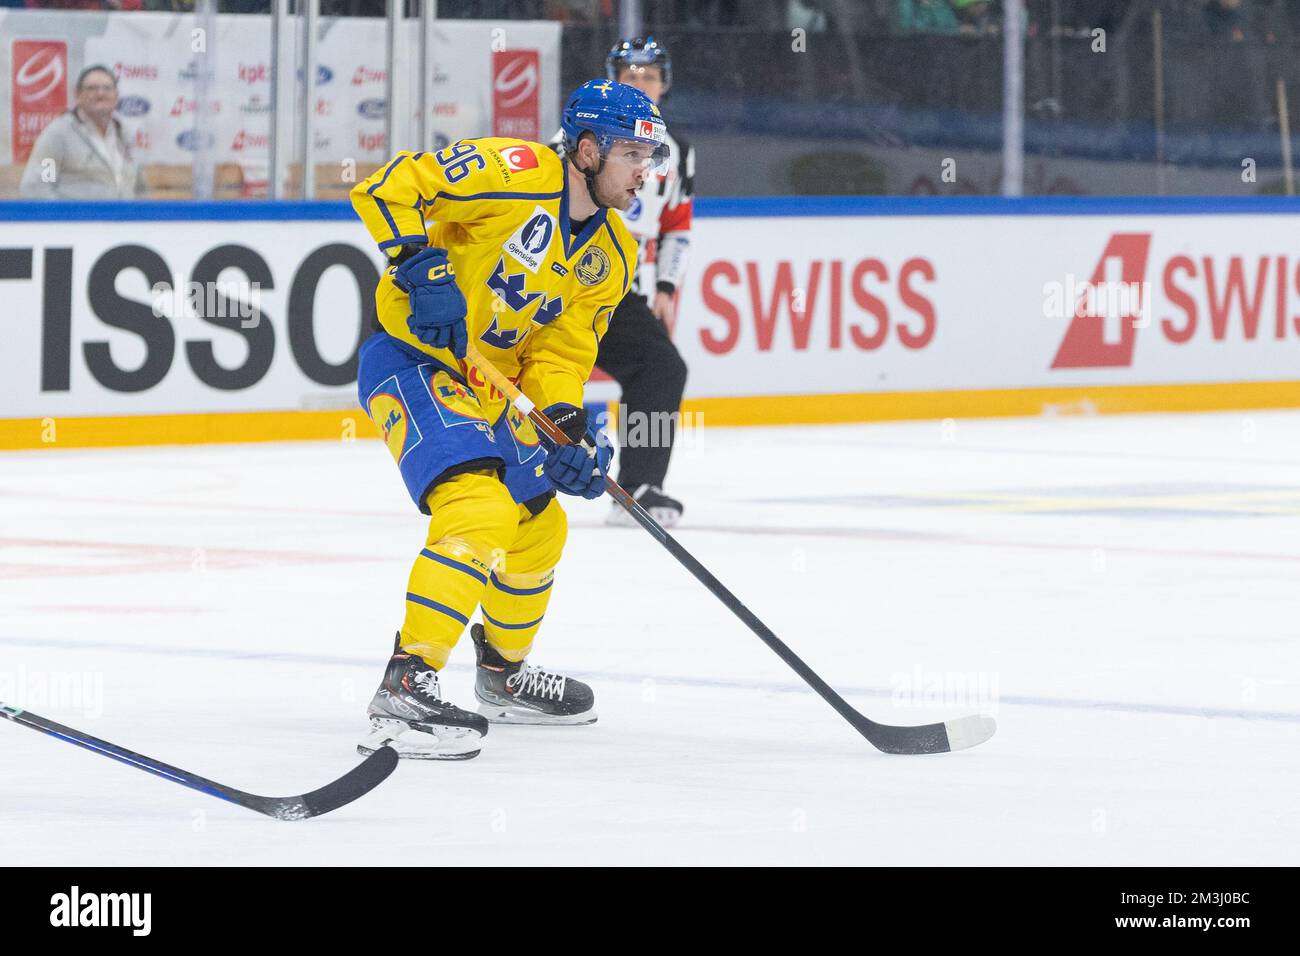 15.12.2022, Fribourg, BCF Arena, SWISS Ice Hockey Games Sweden - Switzerland, #96 Robin Kovacs (Sweden) (Photo by Siriane Davet/Just Pictures/Sipa USA) Credit Sipa US/Alamy Live News Stock Photo